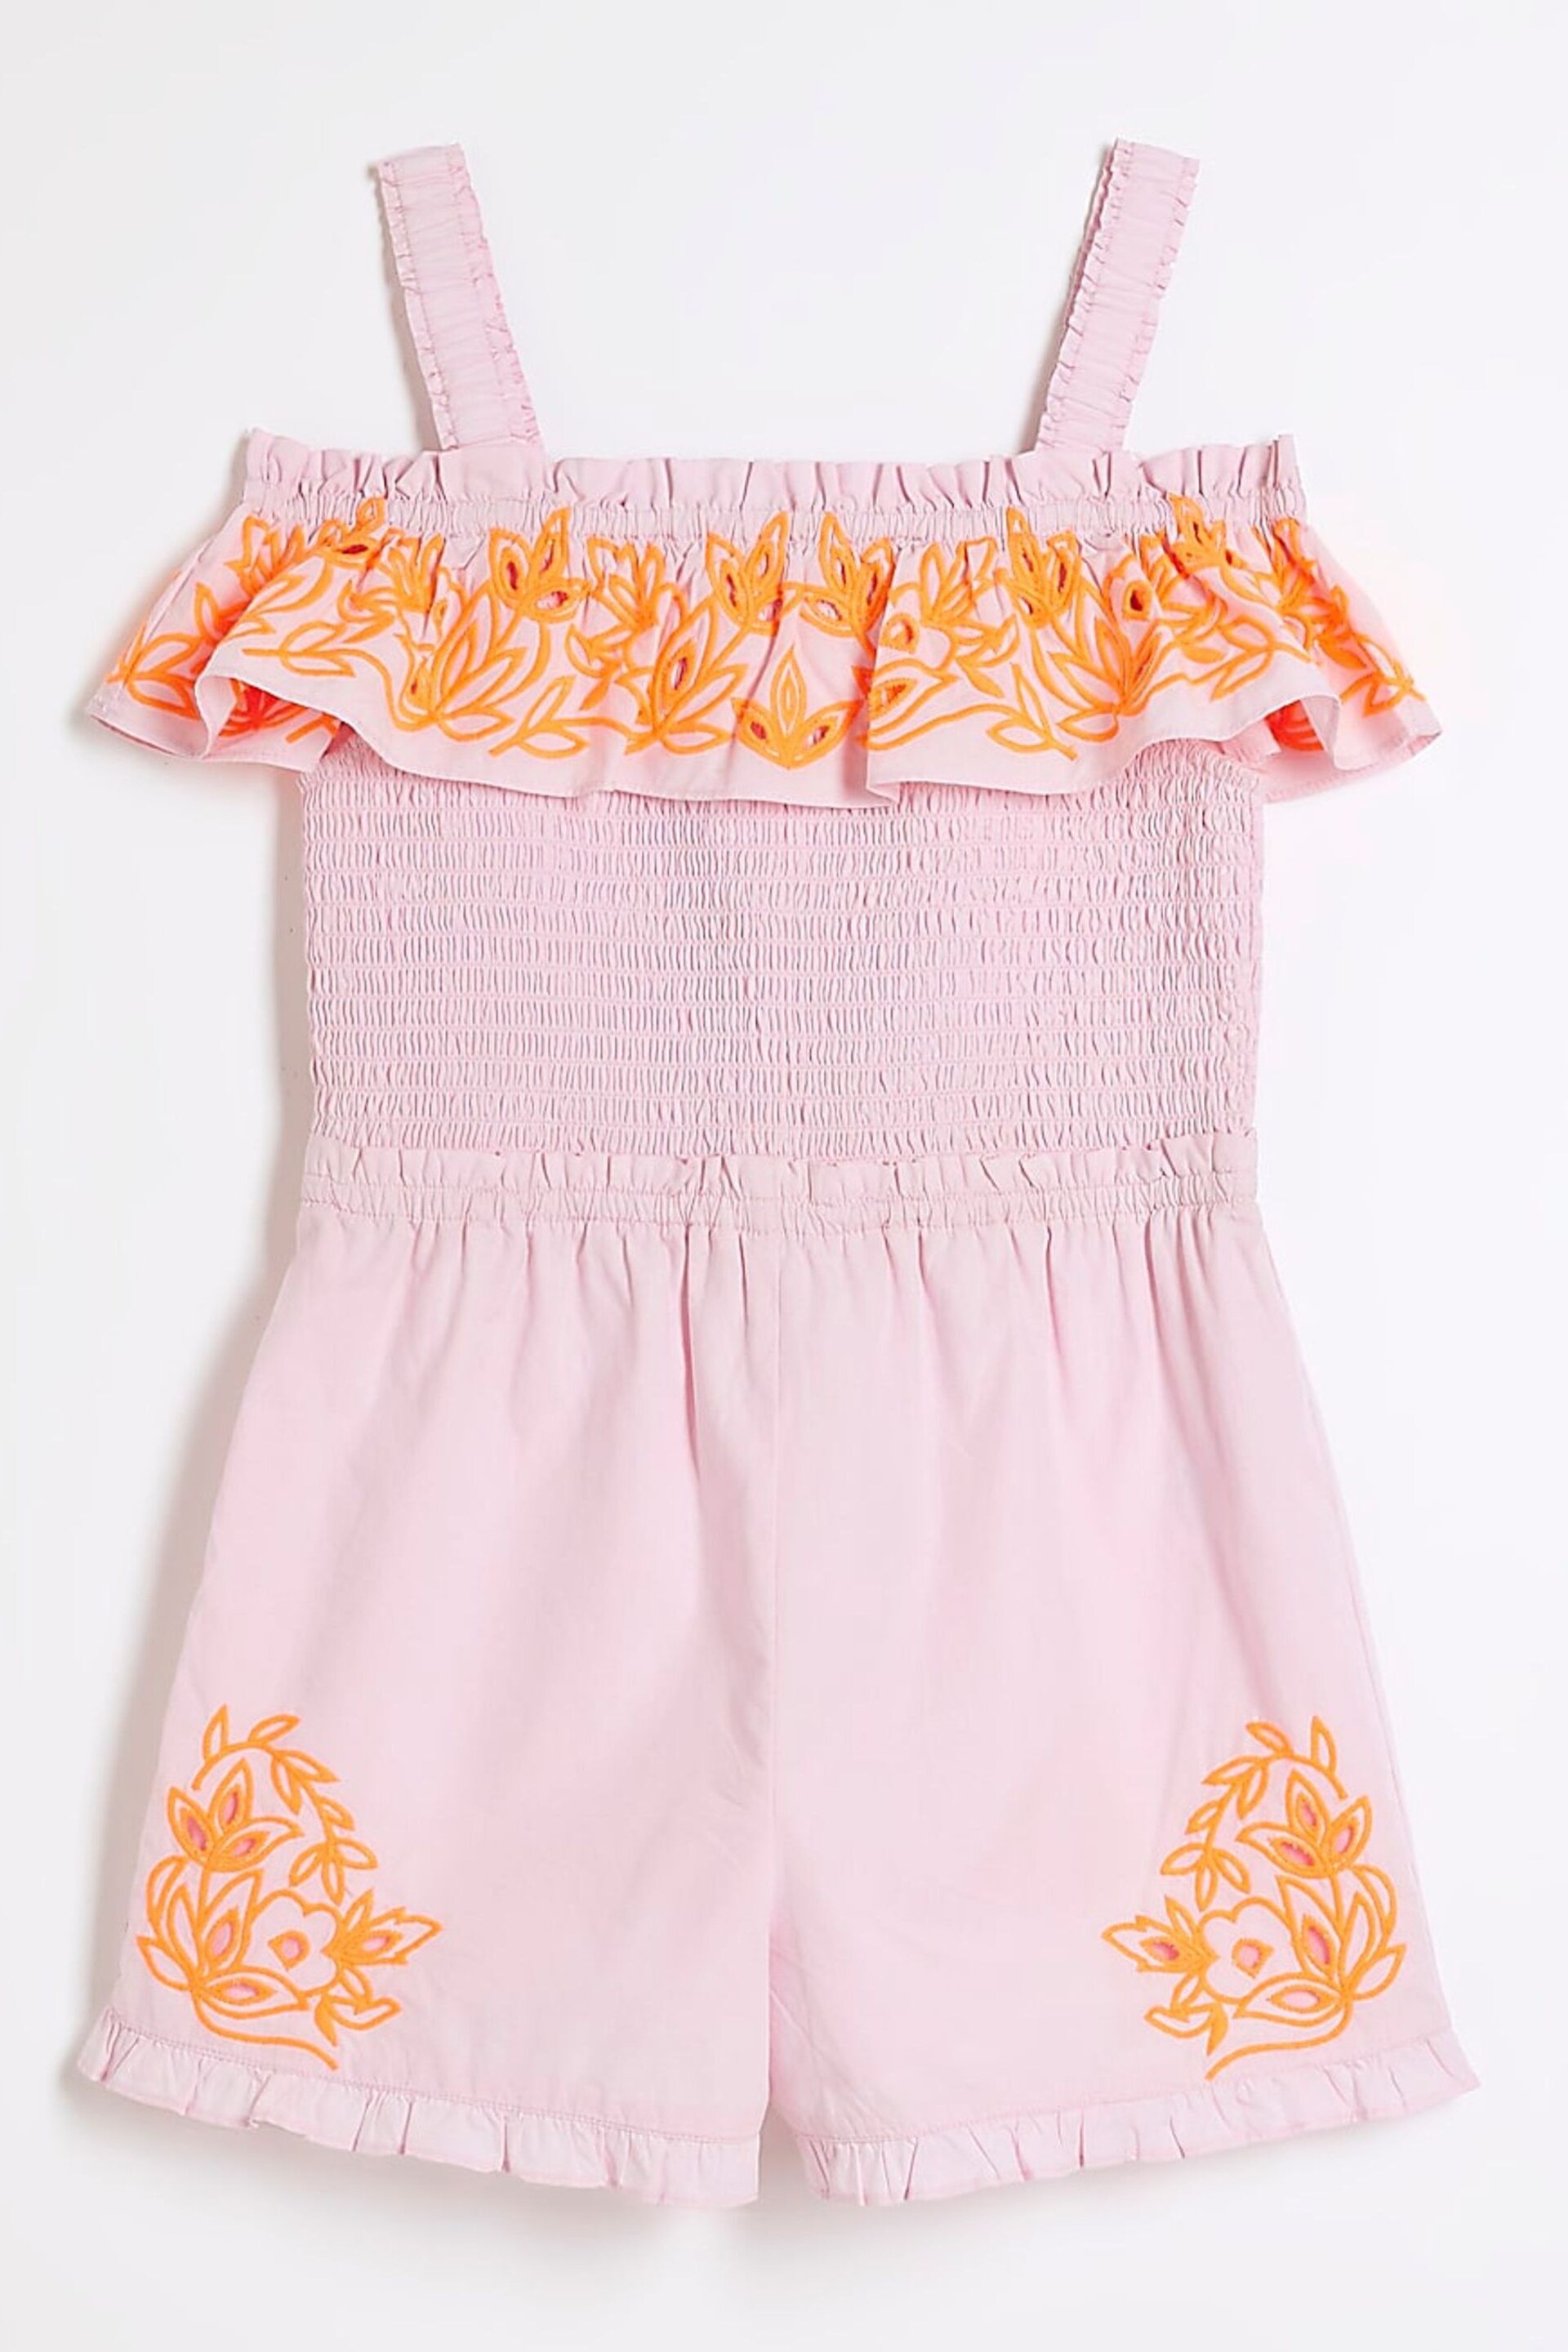 River Island Pink Girls Cutwork Playsuit - Image 3 of 4